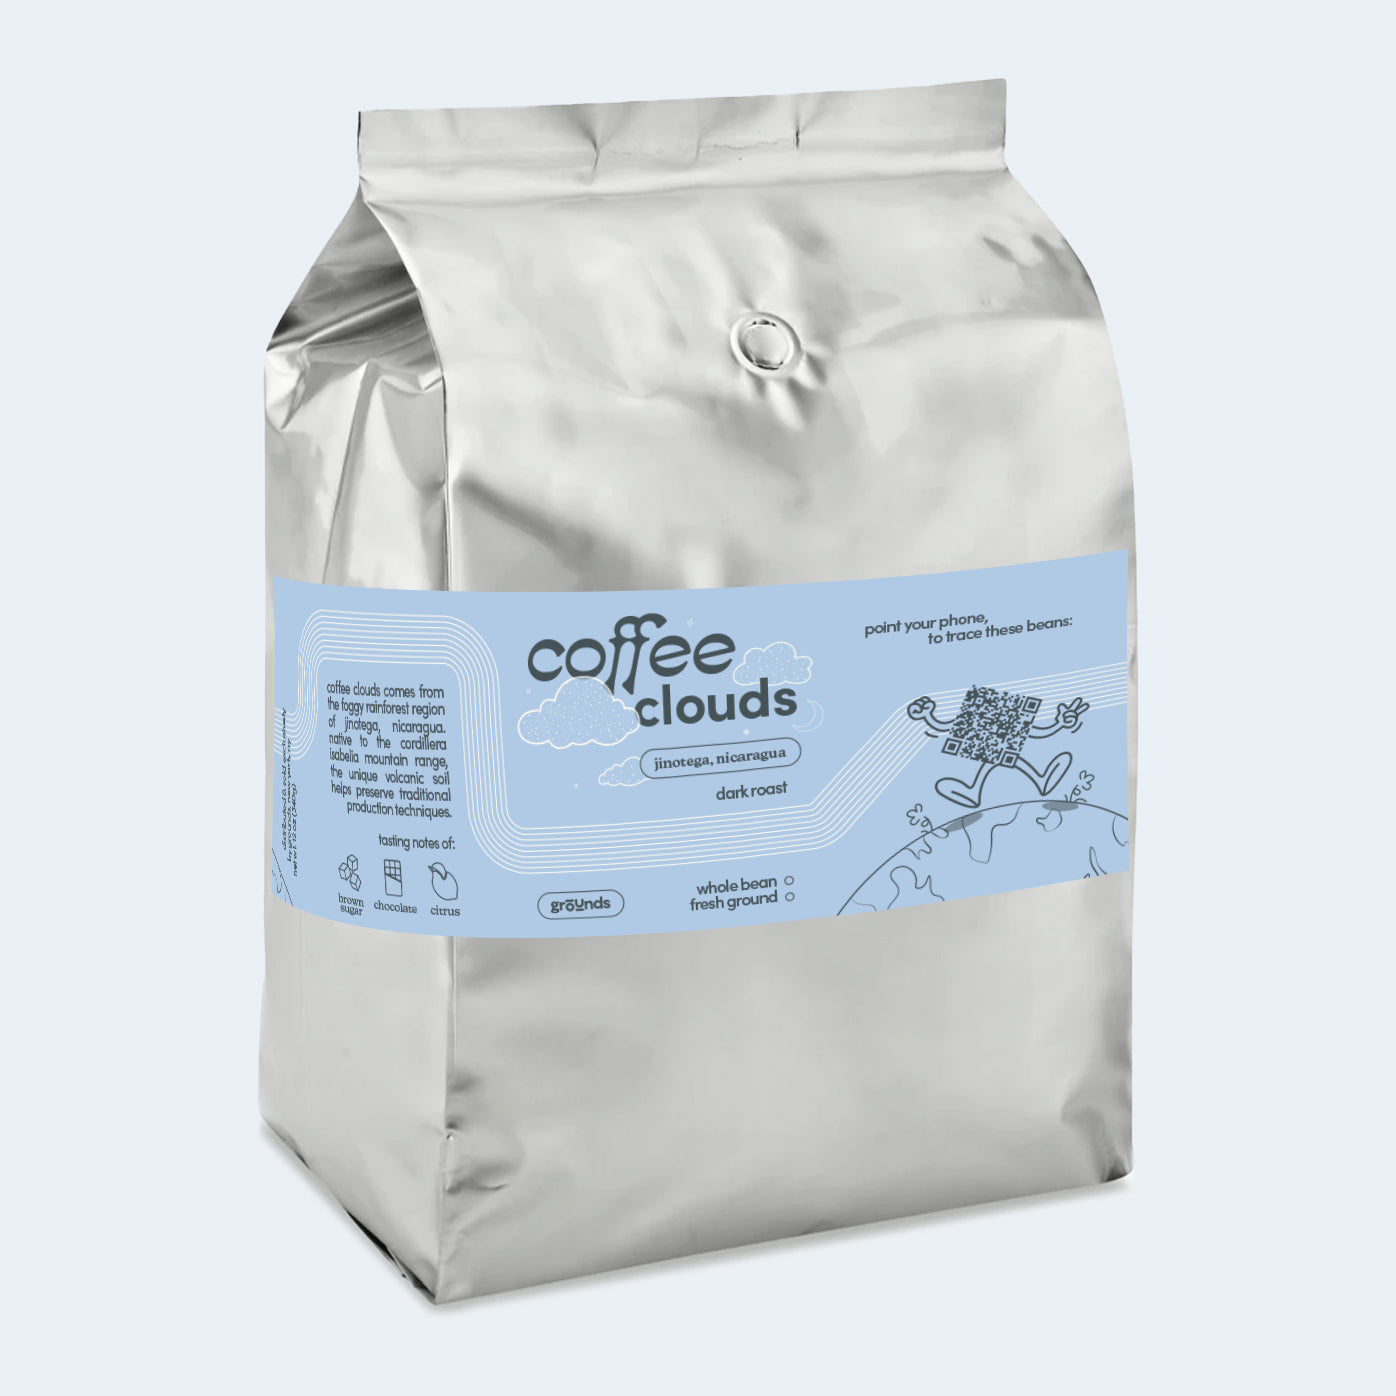 5lb of coffee clouds